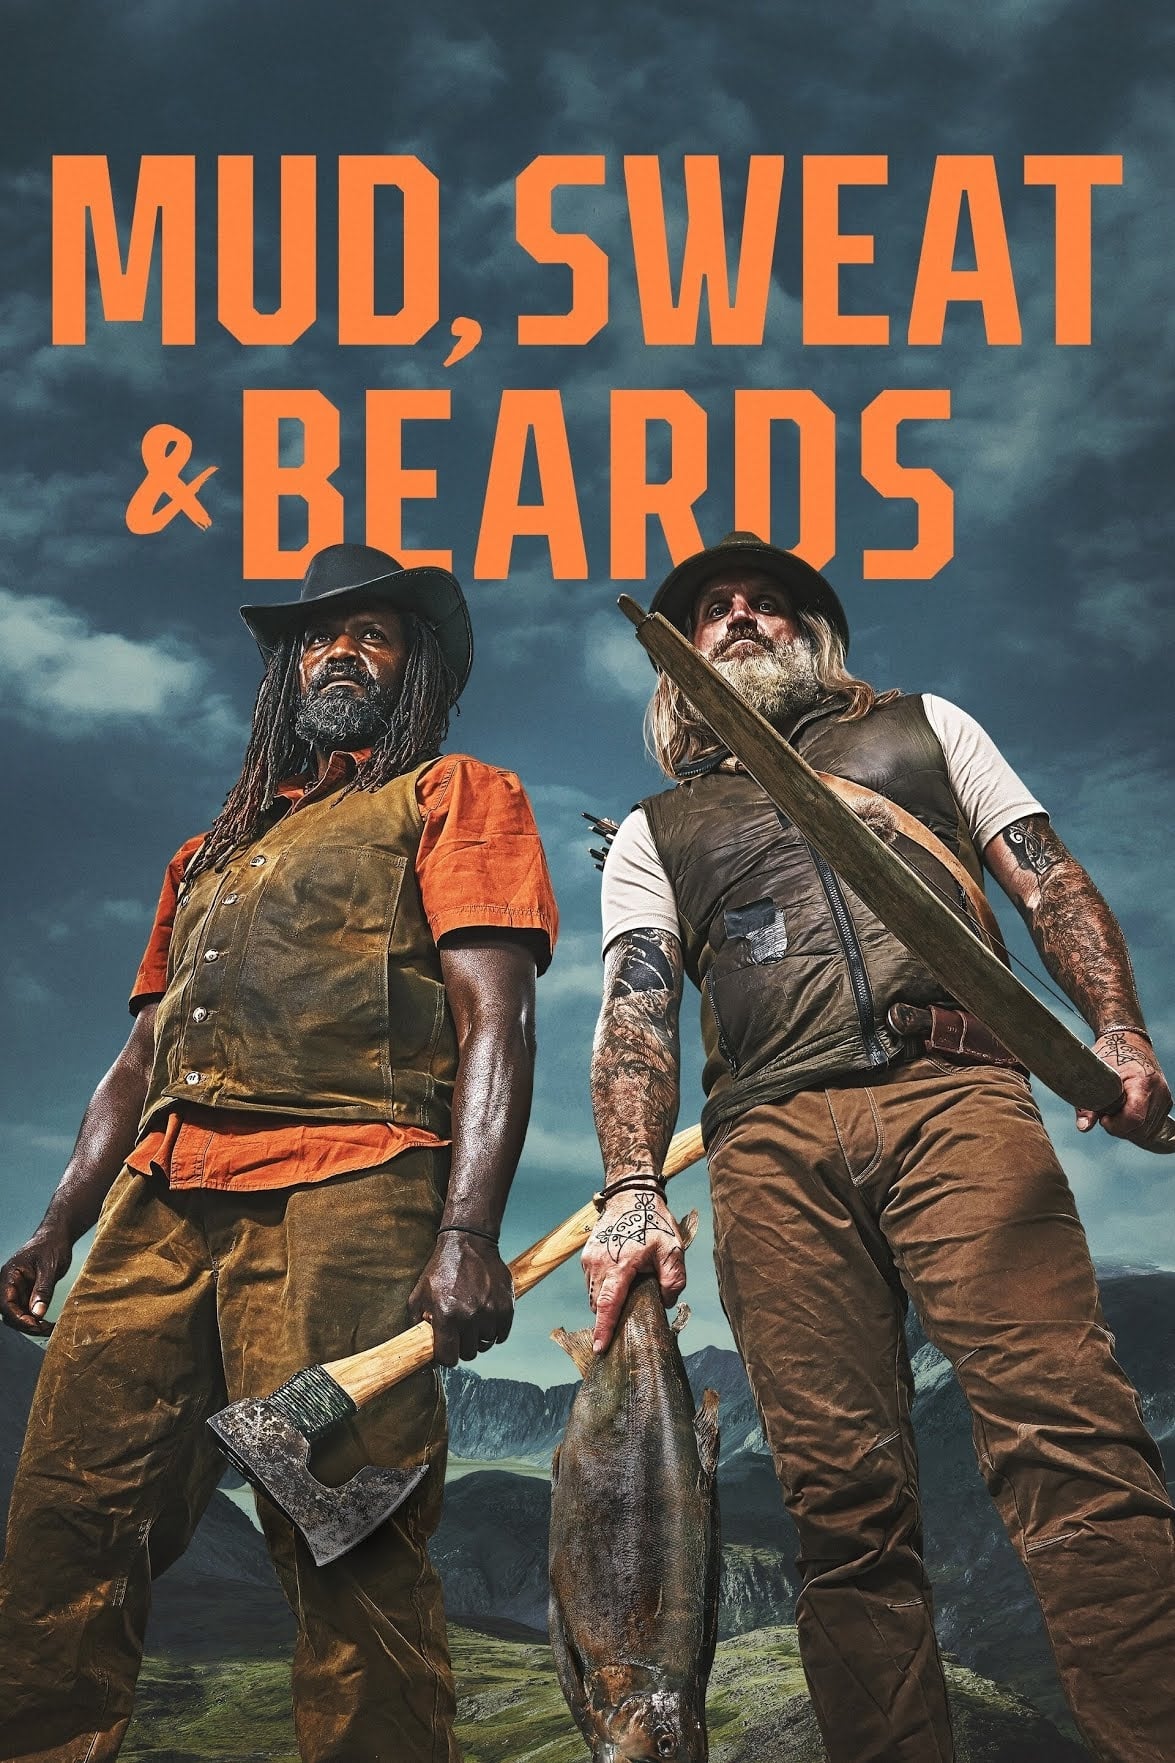 Mud, Sweat and Beards TV Shows About Survival